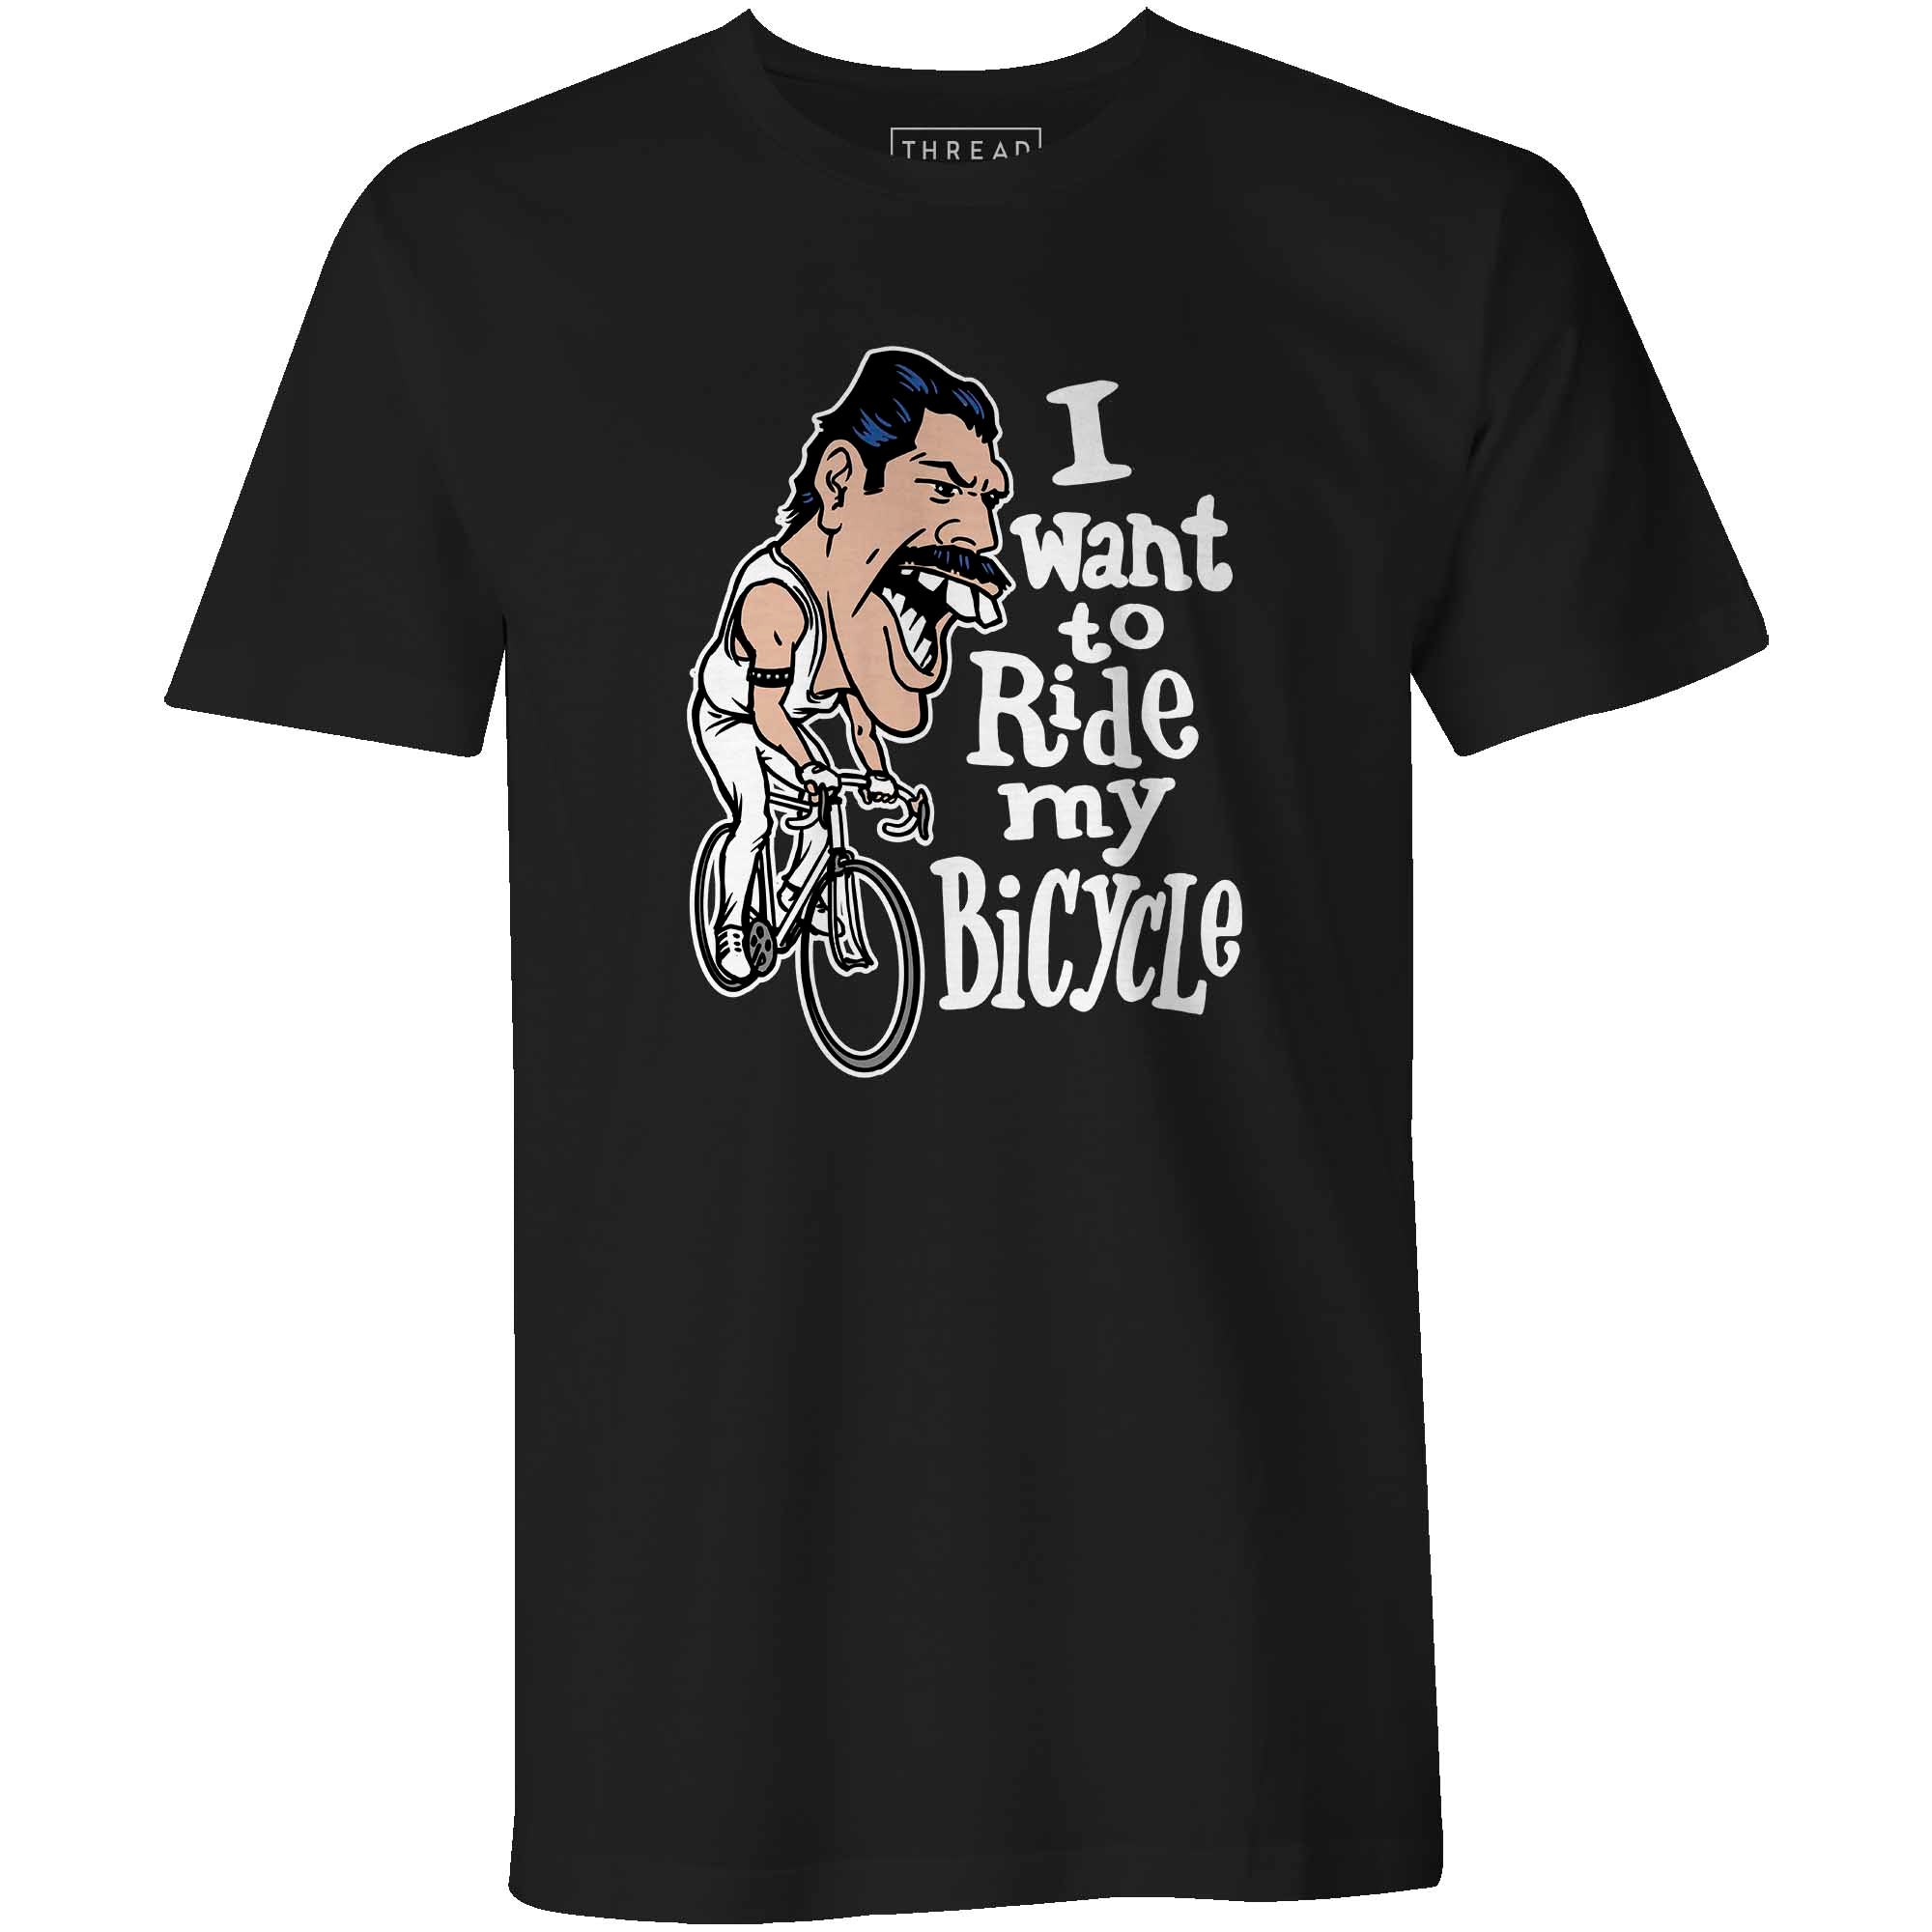 Men's T-shirt - I Want to Ride My Bicycle